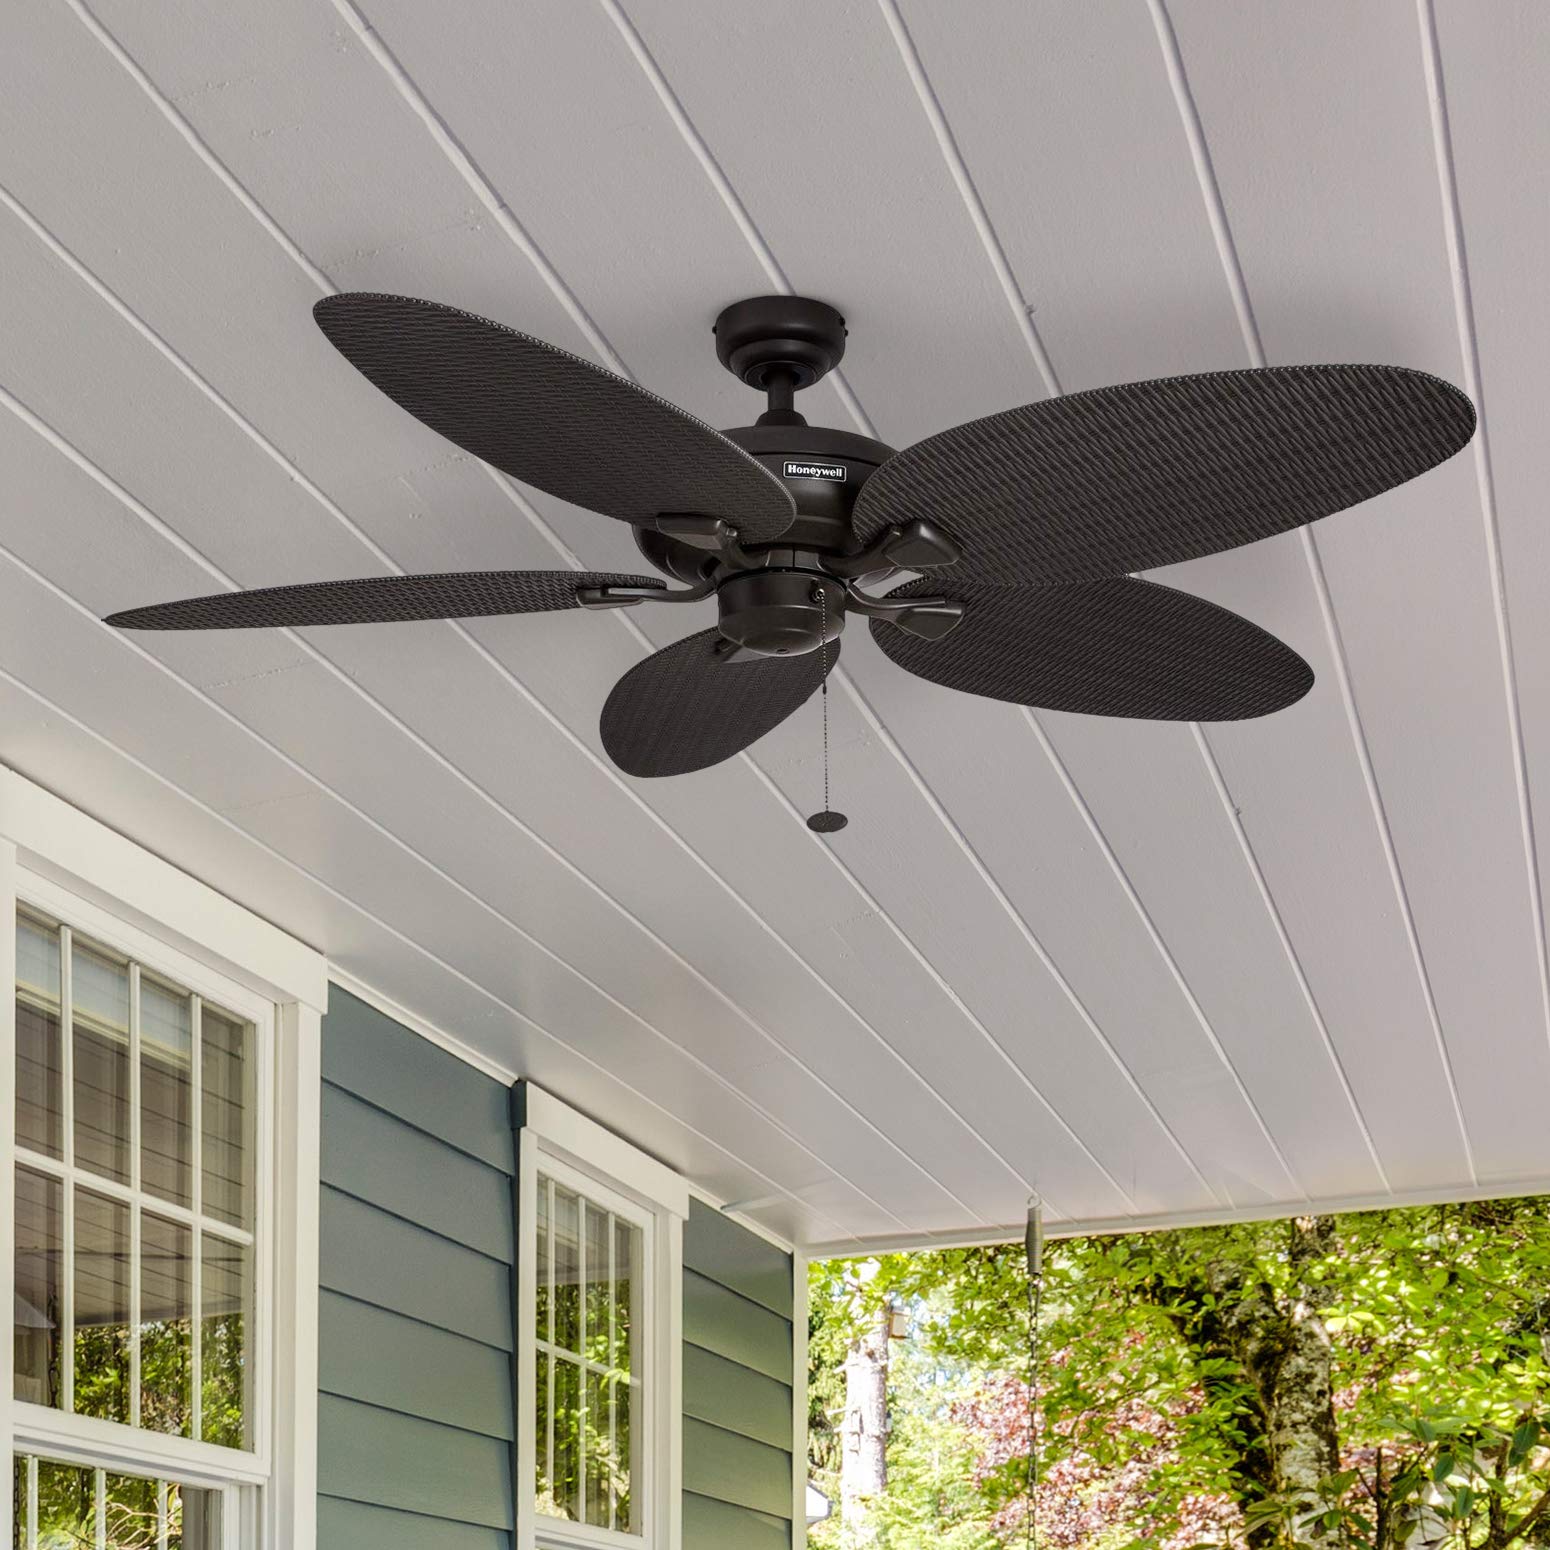 Honeywell Ceiling Fans Duval - 52-in Tri Mount Fan with Pull Chain - Indoor Outdoor Ceiling Fan - No Light - Damp Rated Tropical Room Fan with Wicker Style Blades - Model 50201 (Bronze)